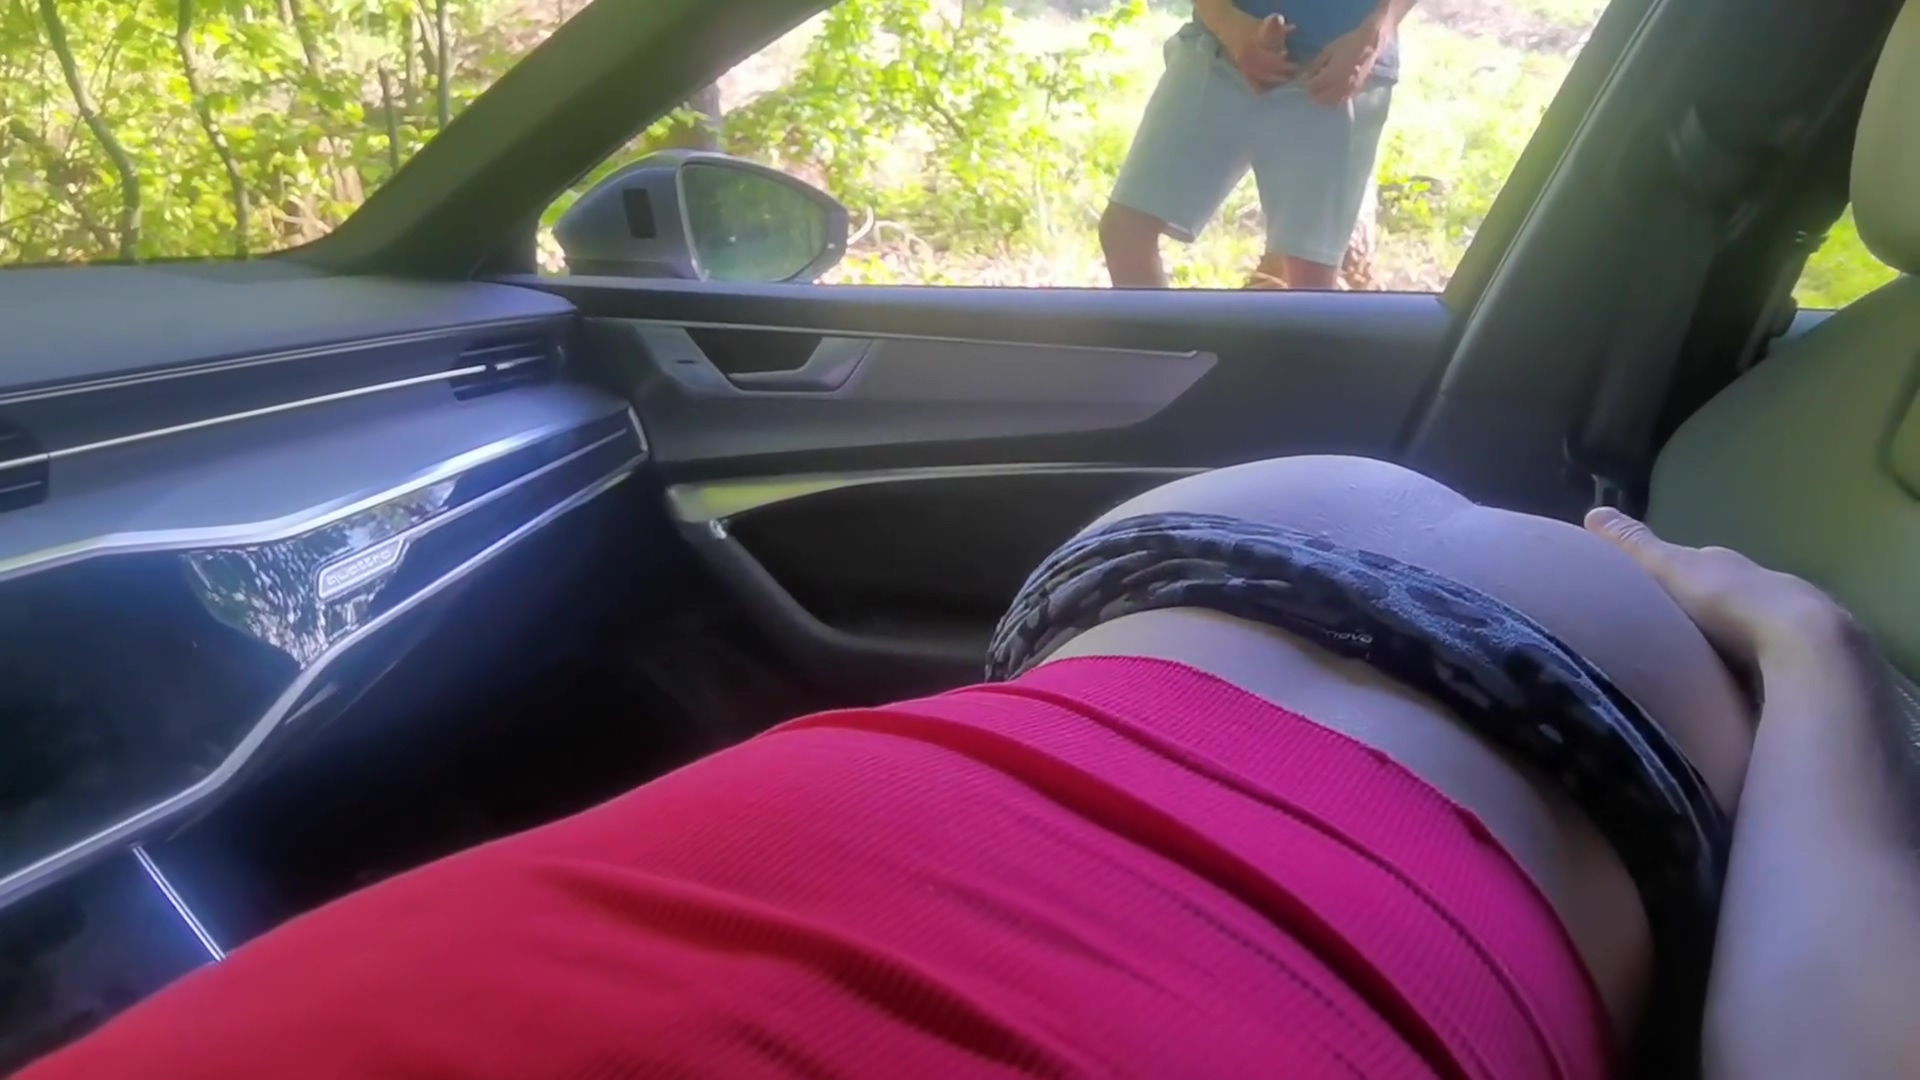 Blowjob In Car - Stranger Voyeur Caught And Watched Us - Video Free Porn Videos bild